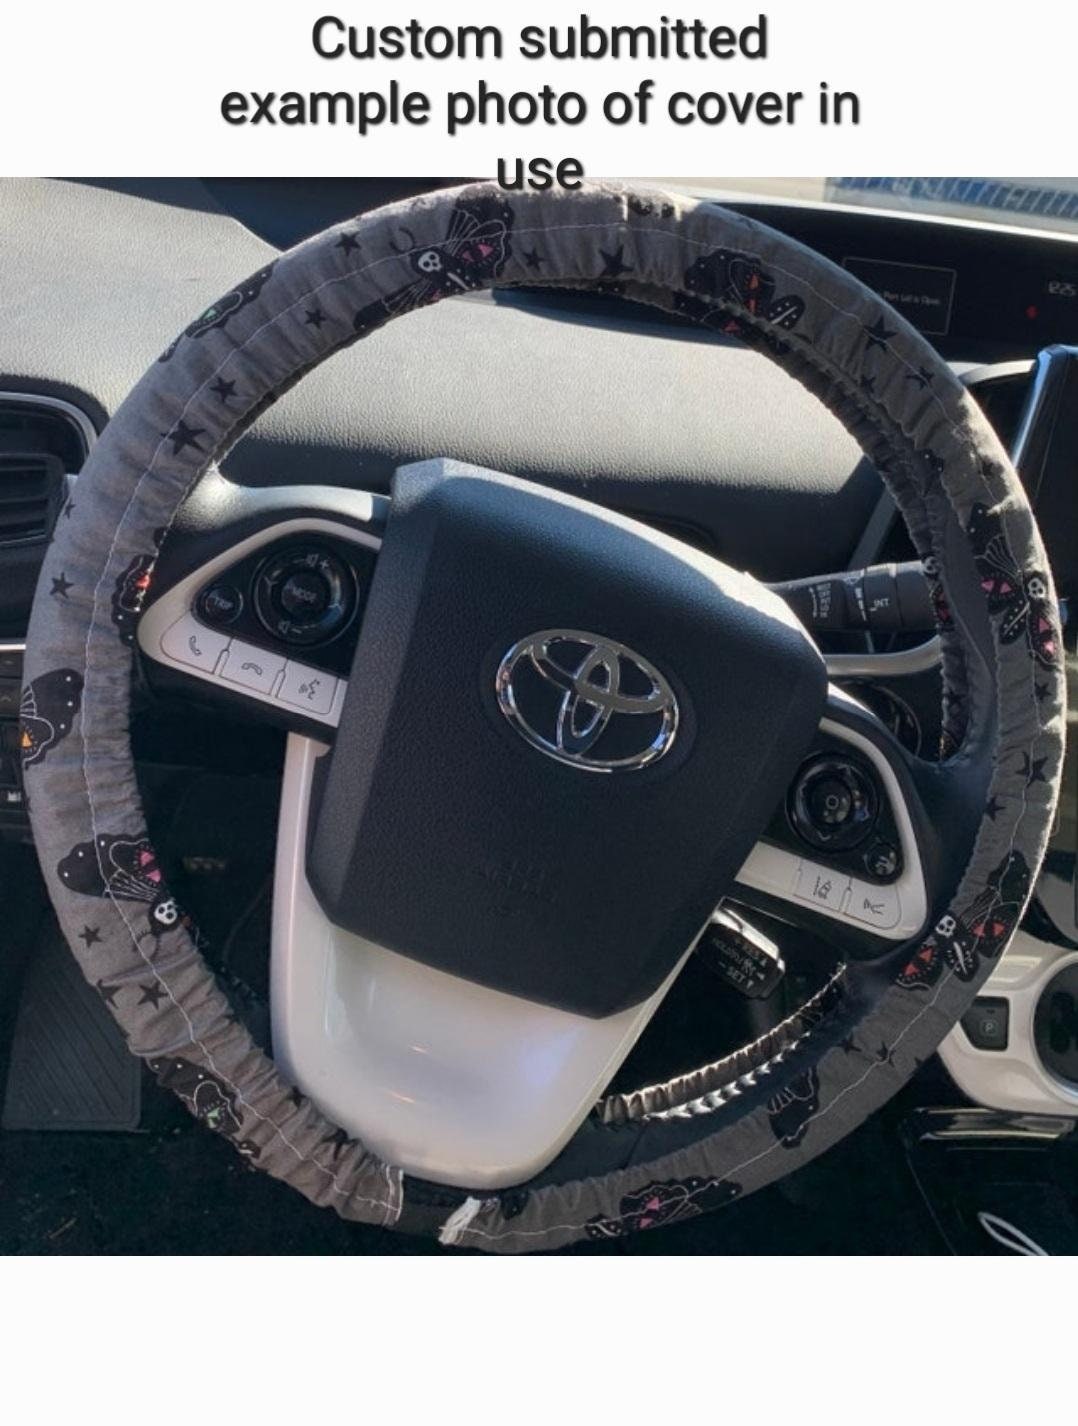 Black Floral Steering Wheel Cover Handmade - Harlow's Store and Garden Gifts